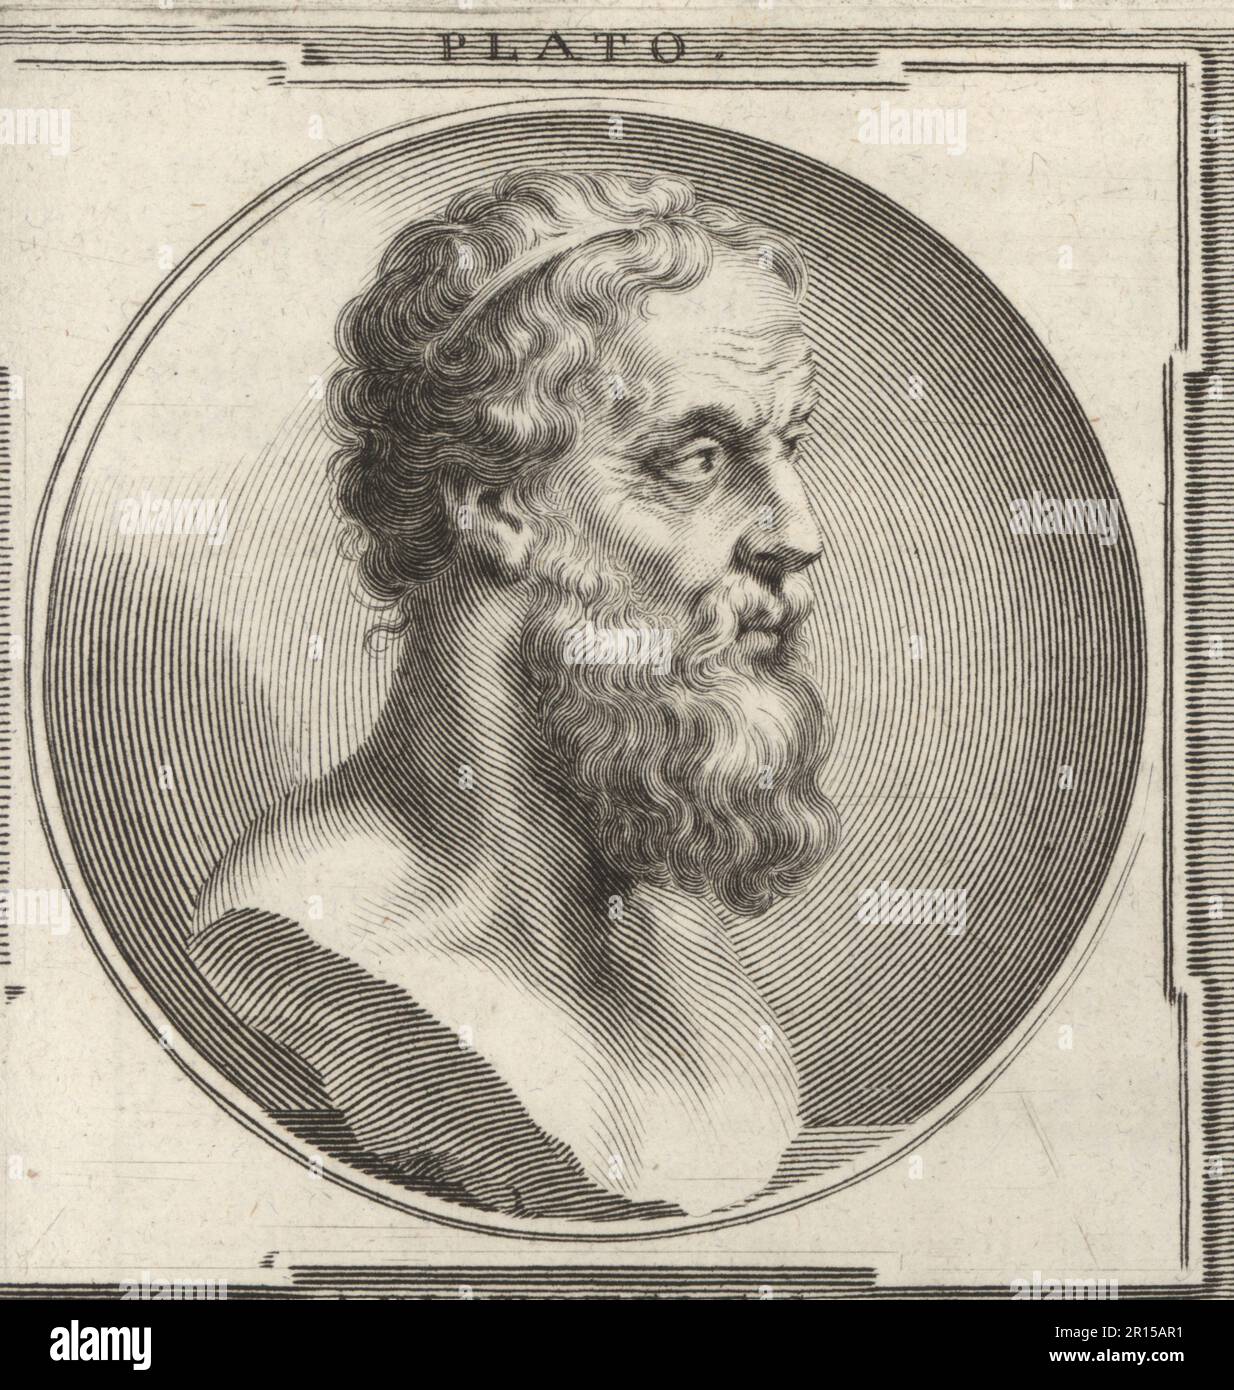 Plato, ancient Greek philosopher born in Athens during the Classical period in Ancient Greece, c.428-348 BC. Plato. Copperplate engraving by Bartholomaus Kilian after an illustration by Joachim von Sandrart from his L’Academia Todesca, della Architectura, Scultura & Pittura, oder Teutsche Academie, der Edlen Bau- Bild- und Mahlerey-Kunste, German Academy of Architecture, Sculpture and Painting, Jacob von Sandrart, Nuremberg, 1675. Stock Photo